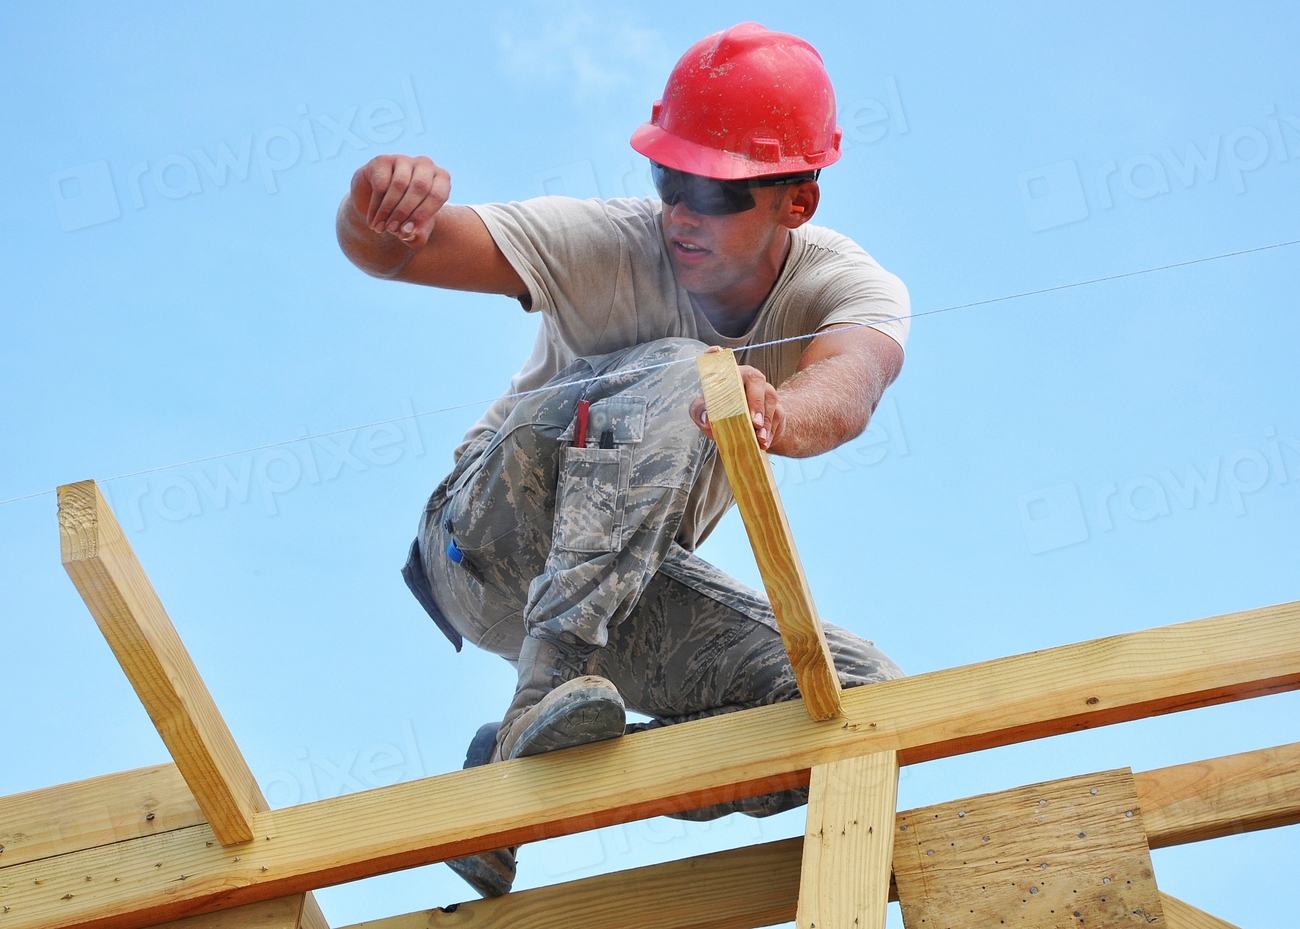 Construction worker wearing a hard hat on a construction site.